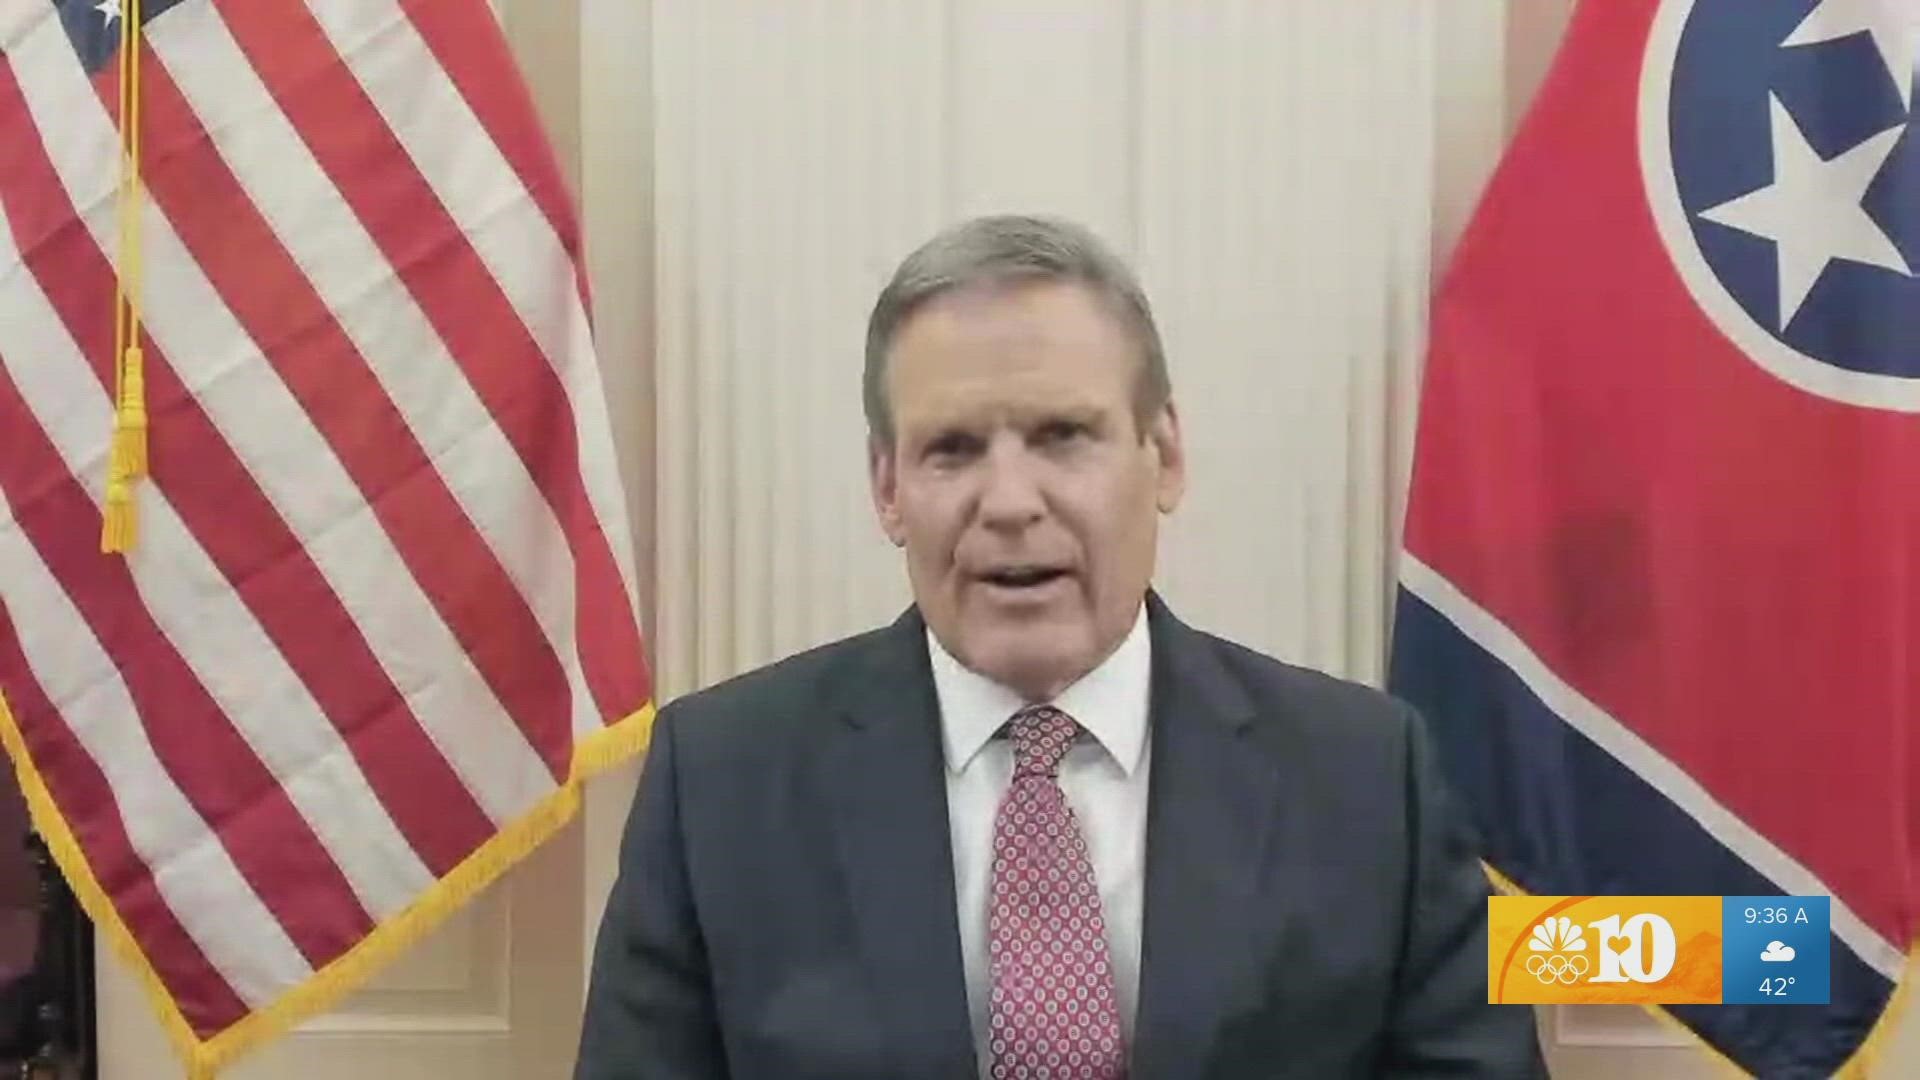 We sit down with Tennessee Governor Bill Lee.